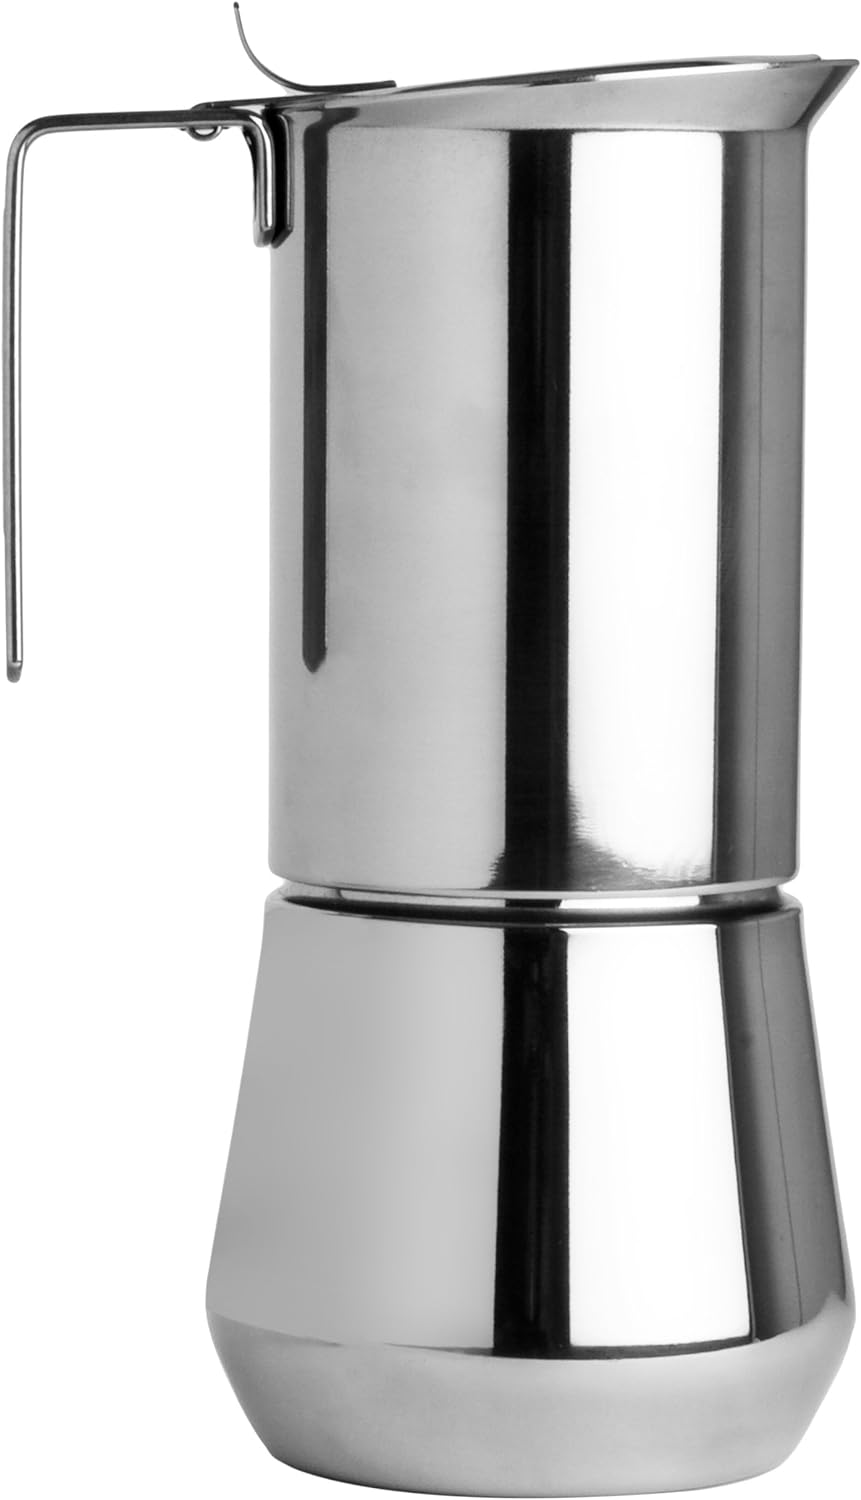 Ilsa Stainless Steel 6 Cup Stovetop Espresso Maker Review | Morning ...